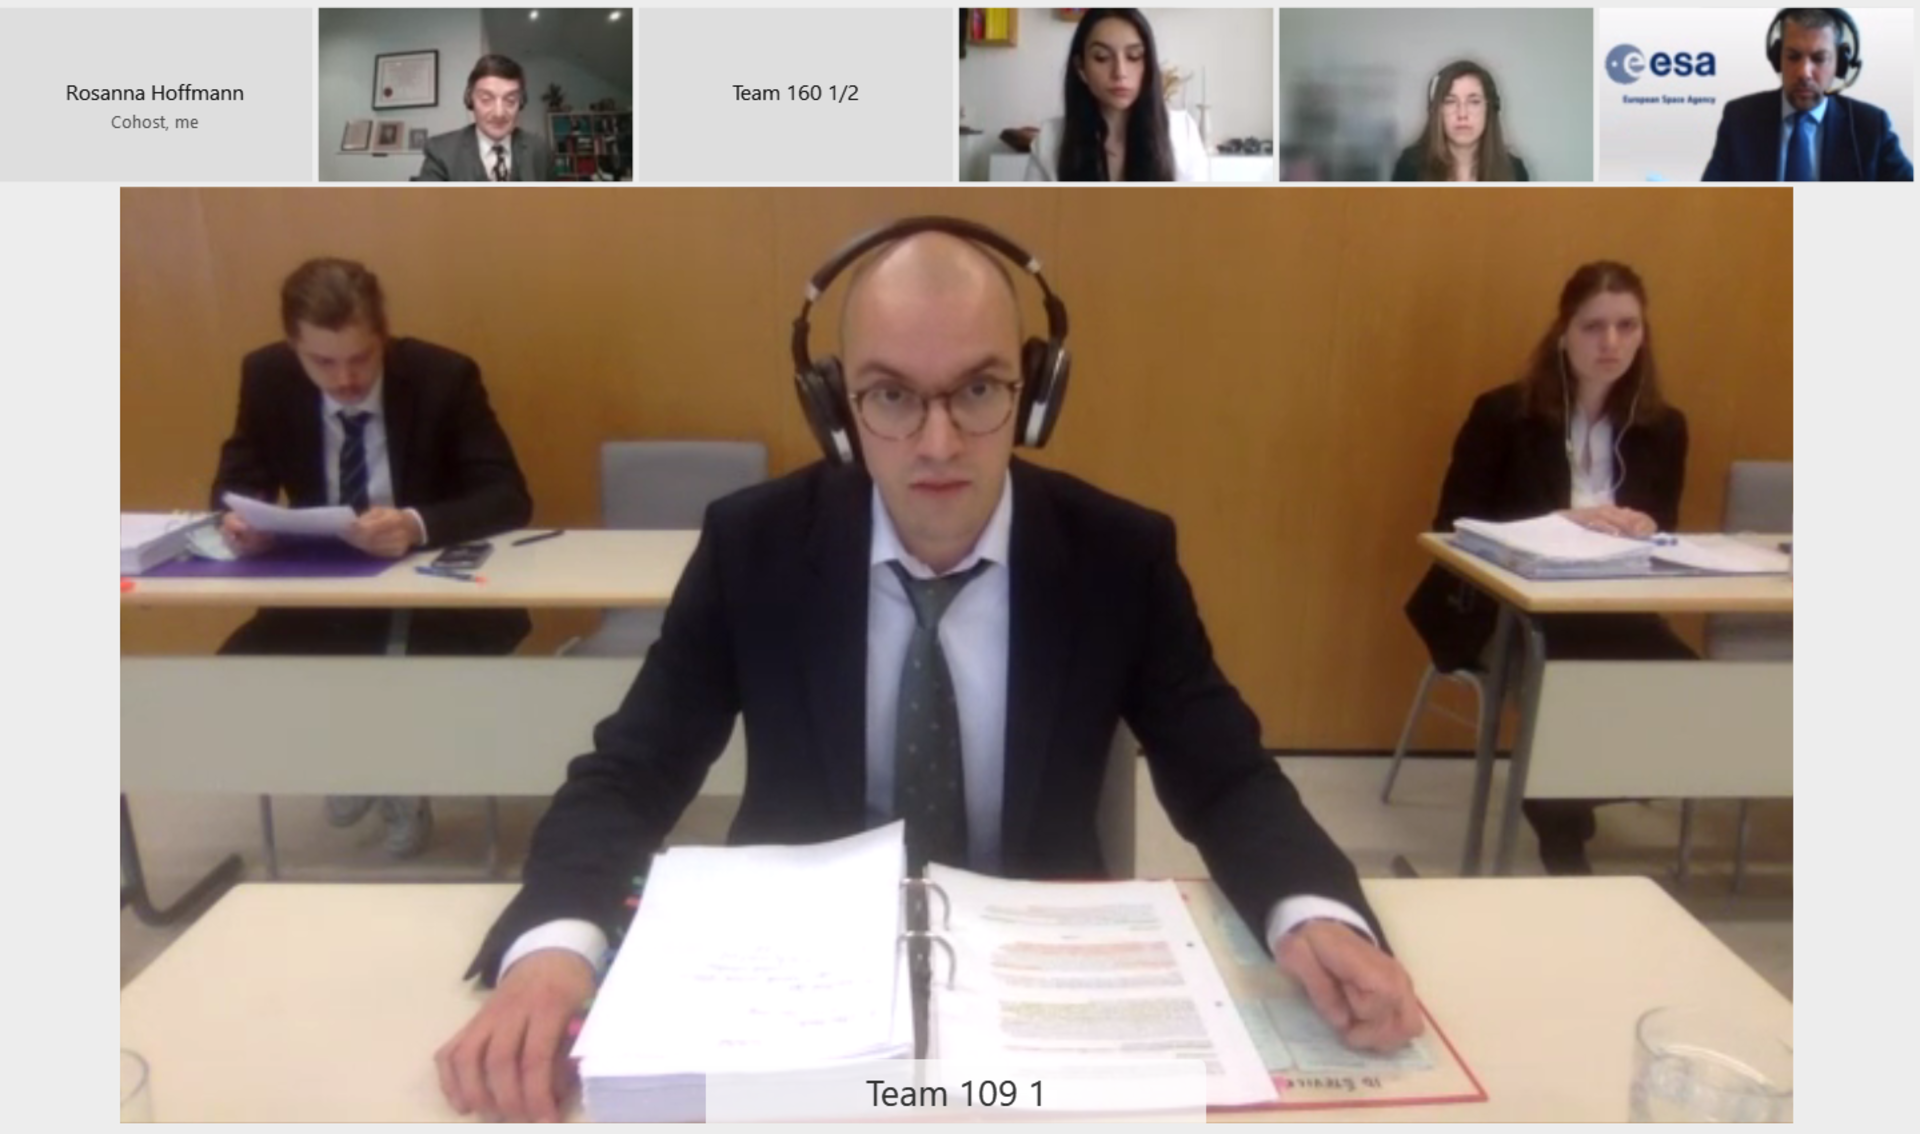 Semi Final Round I of the European Oral Rounds of the MLMC 2021 - Team 109